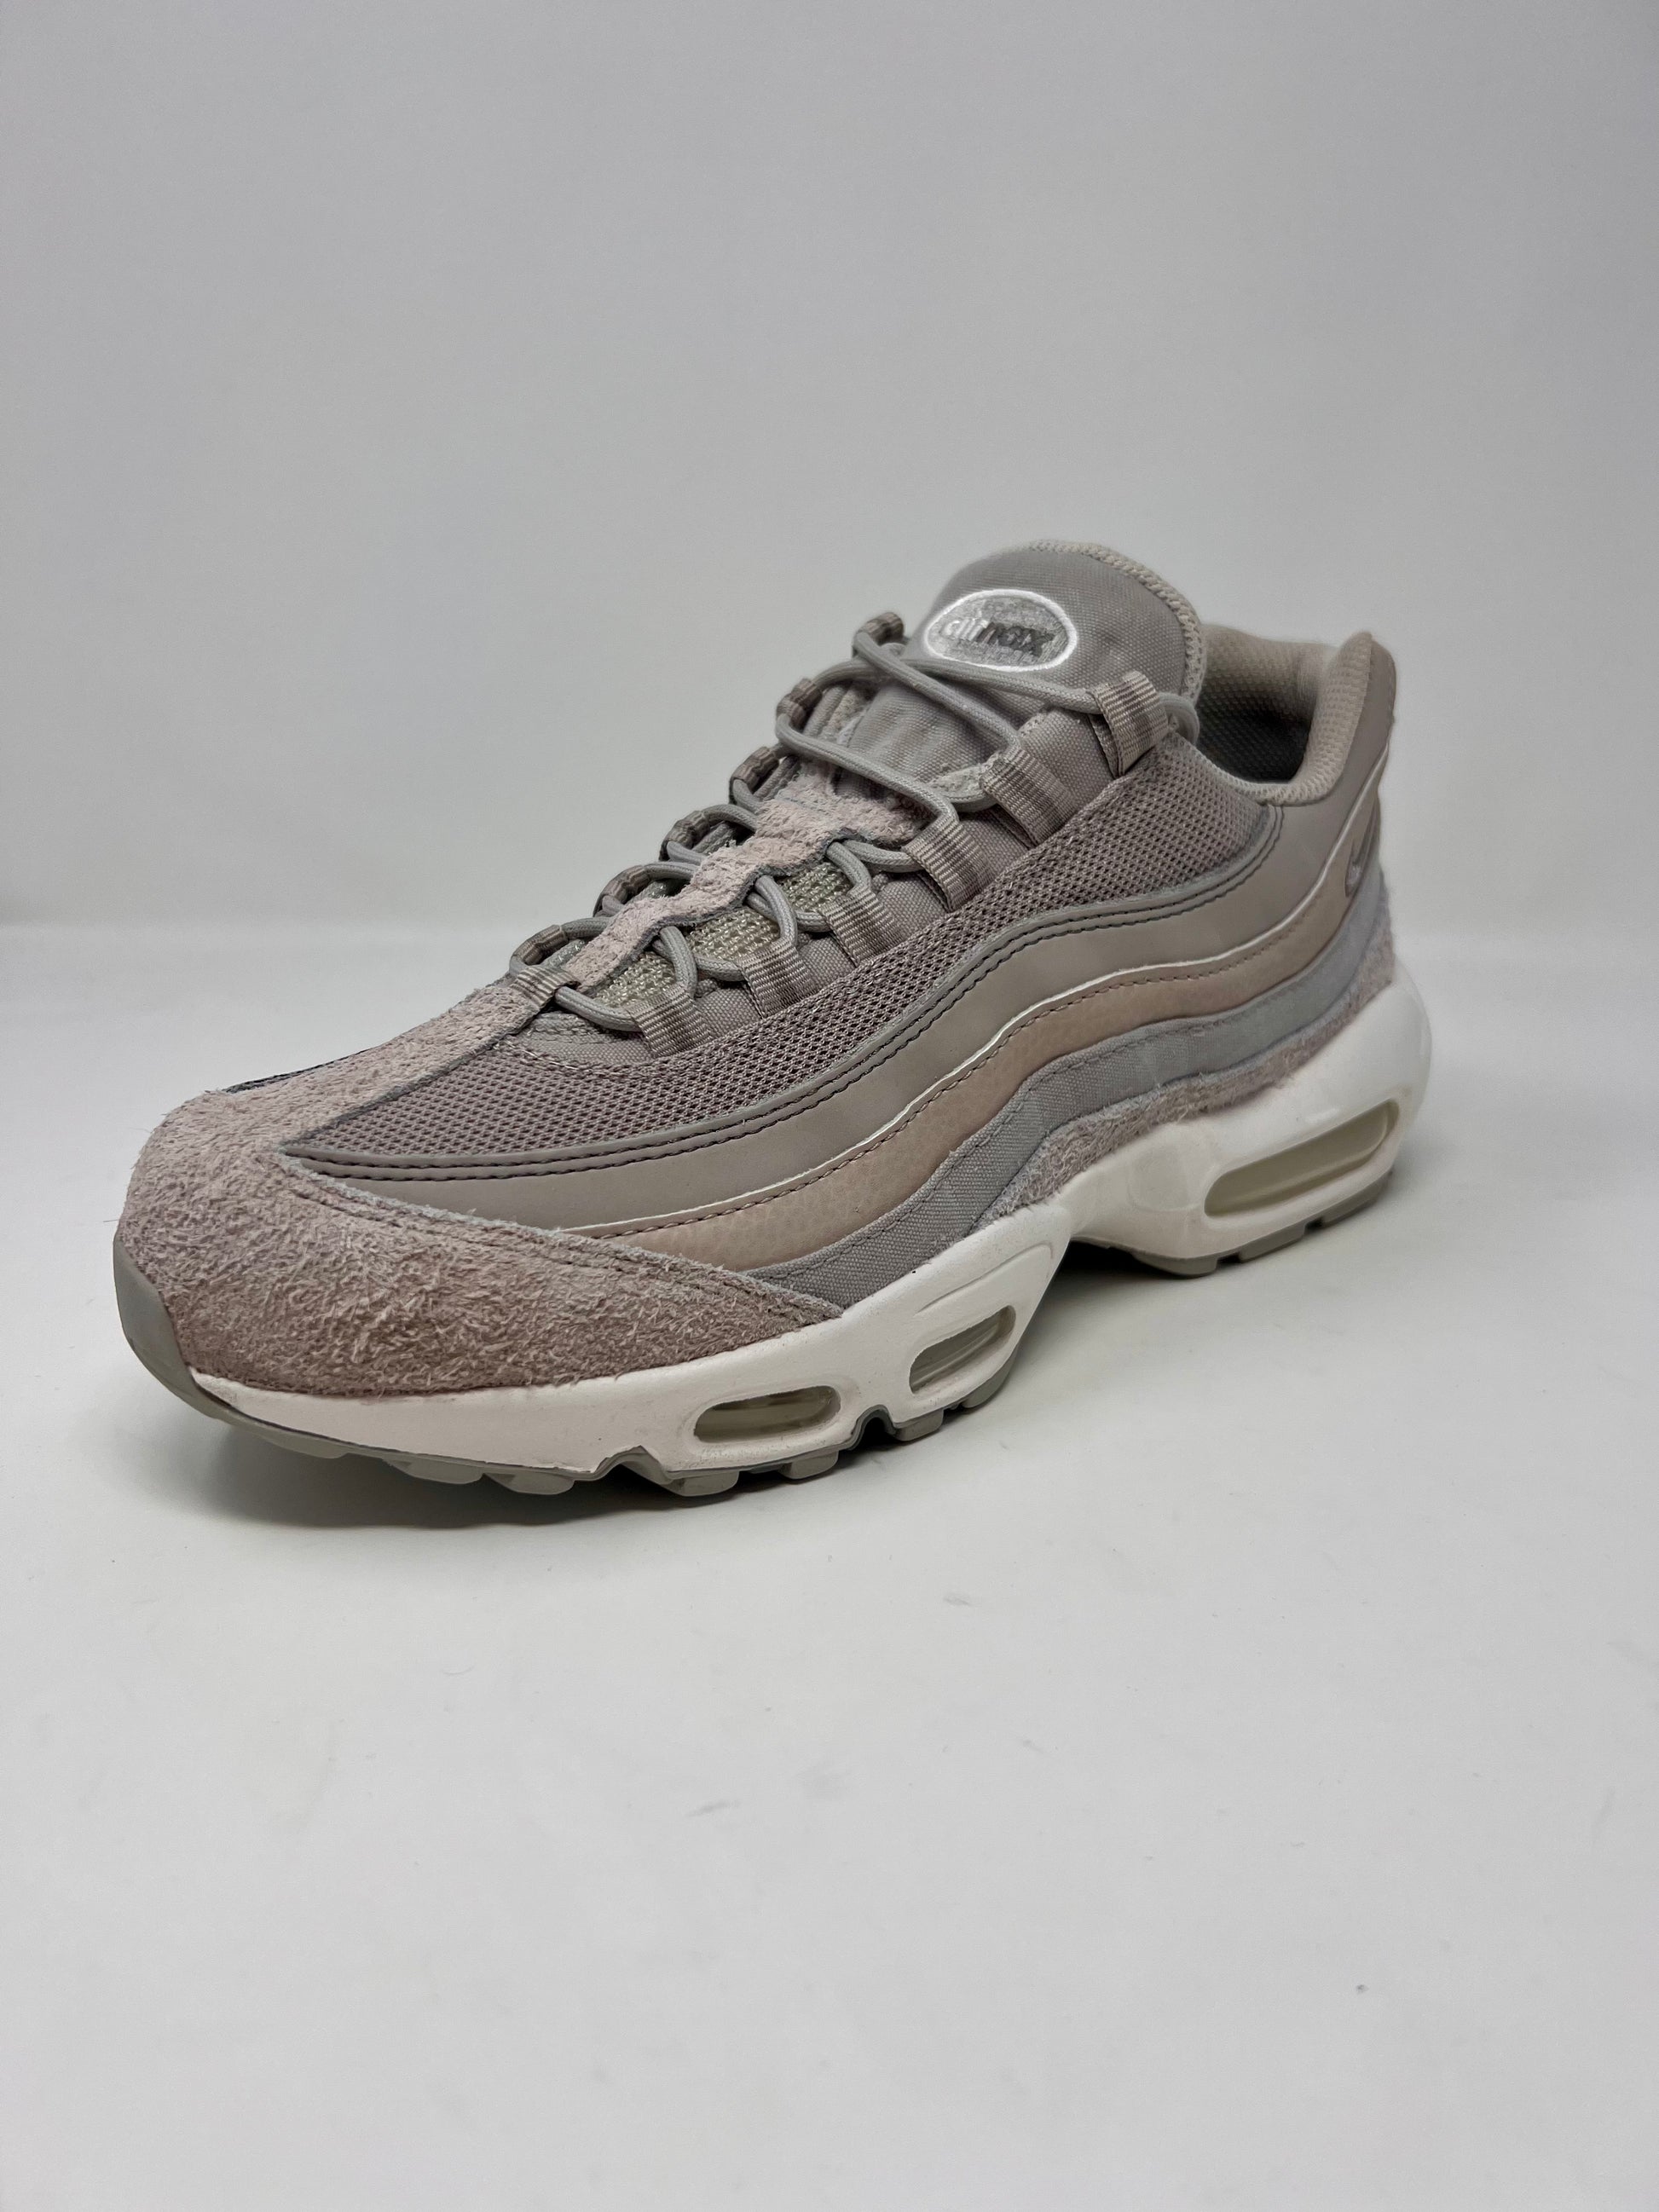 Get the Suede Touch With Nike's Air Max 95 Cobblestone